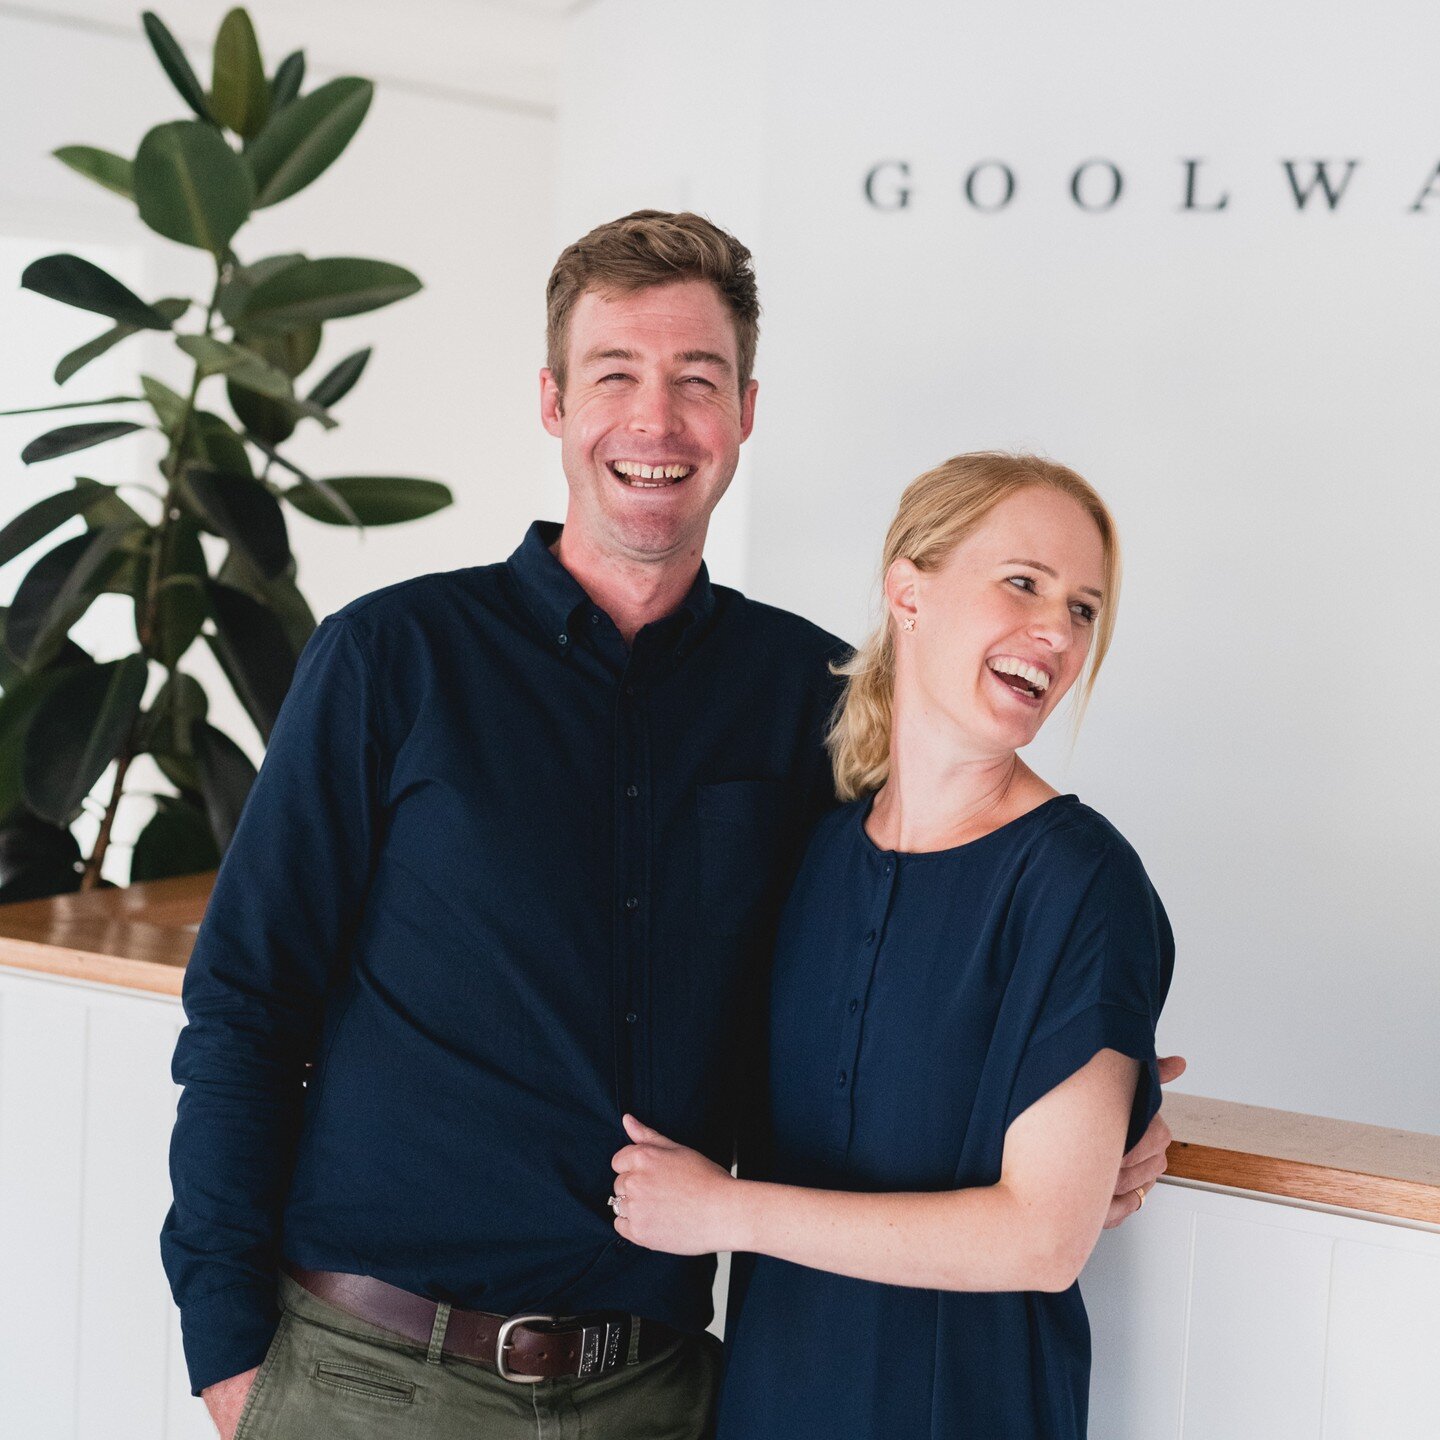 Meet physiotherapists Chloe &amp; Stuart. Founders of @goolwahealthco &amp; @fleurieu_physio - soon to be @goolwaphysio ! Chloe and Stuart wanted to create a long term home for their physio team and a vibrant allied health care space in Goolwa to hel